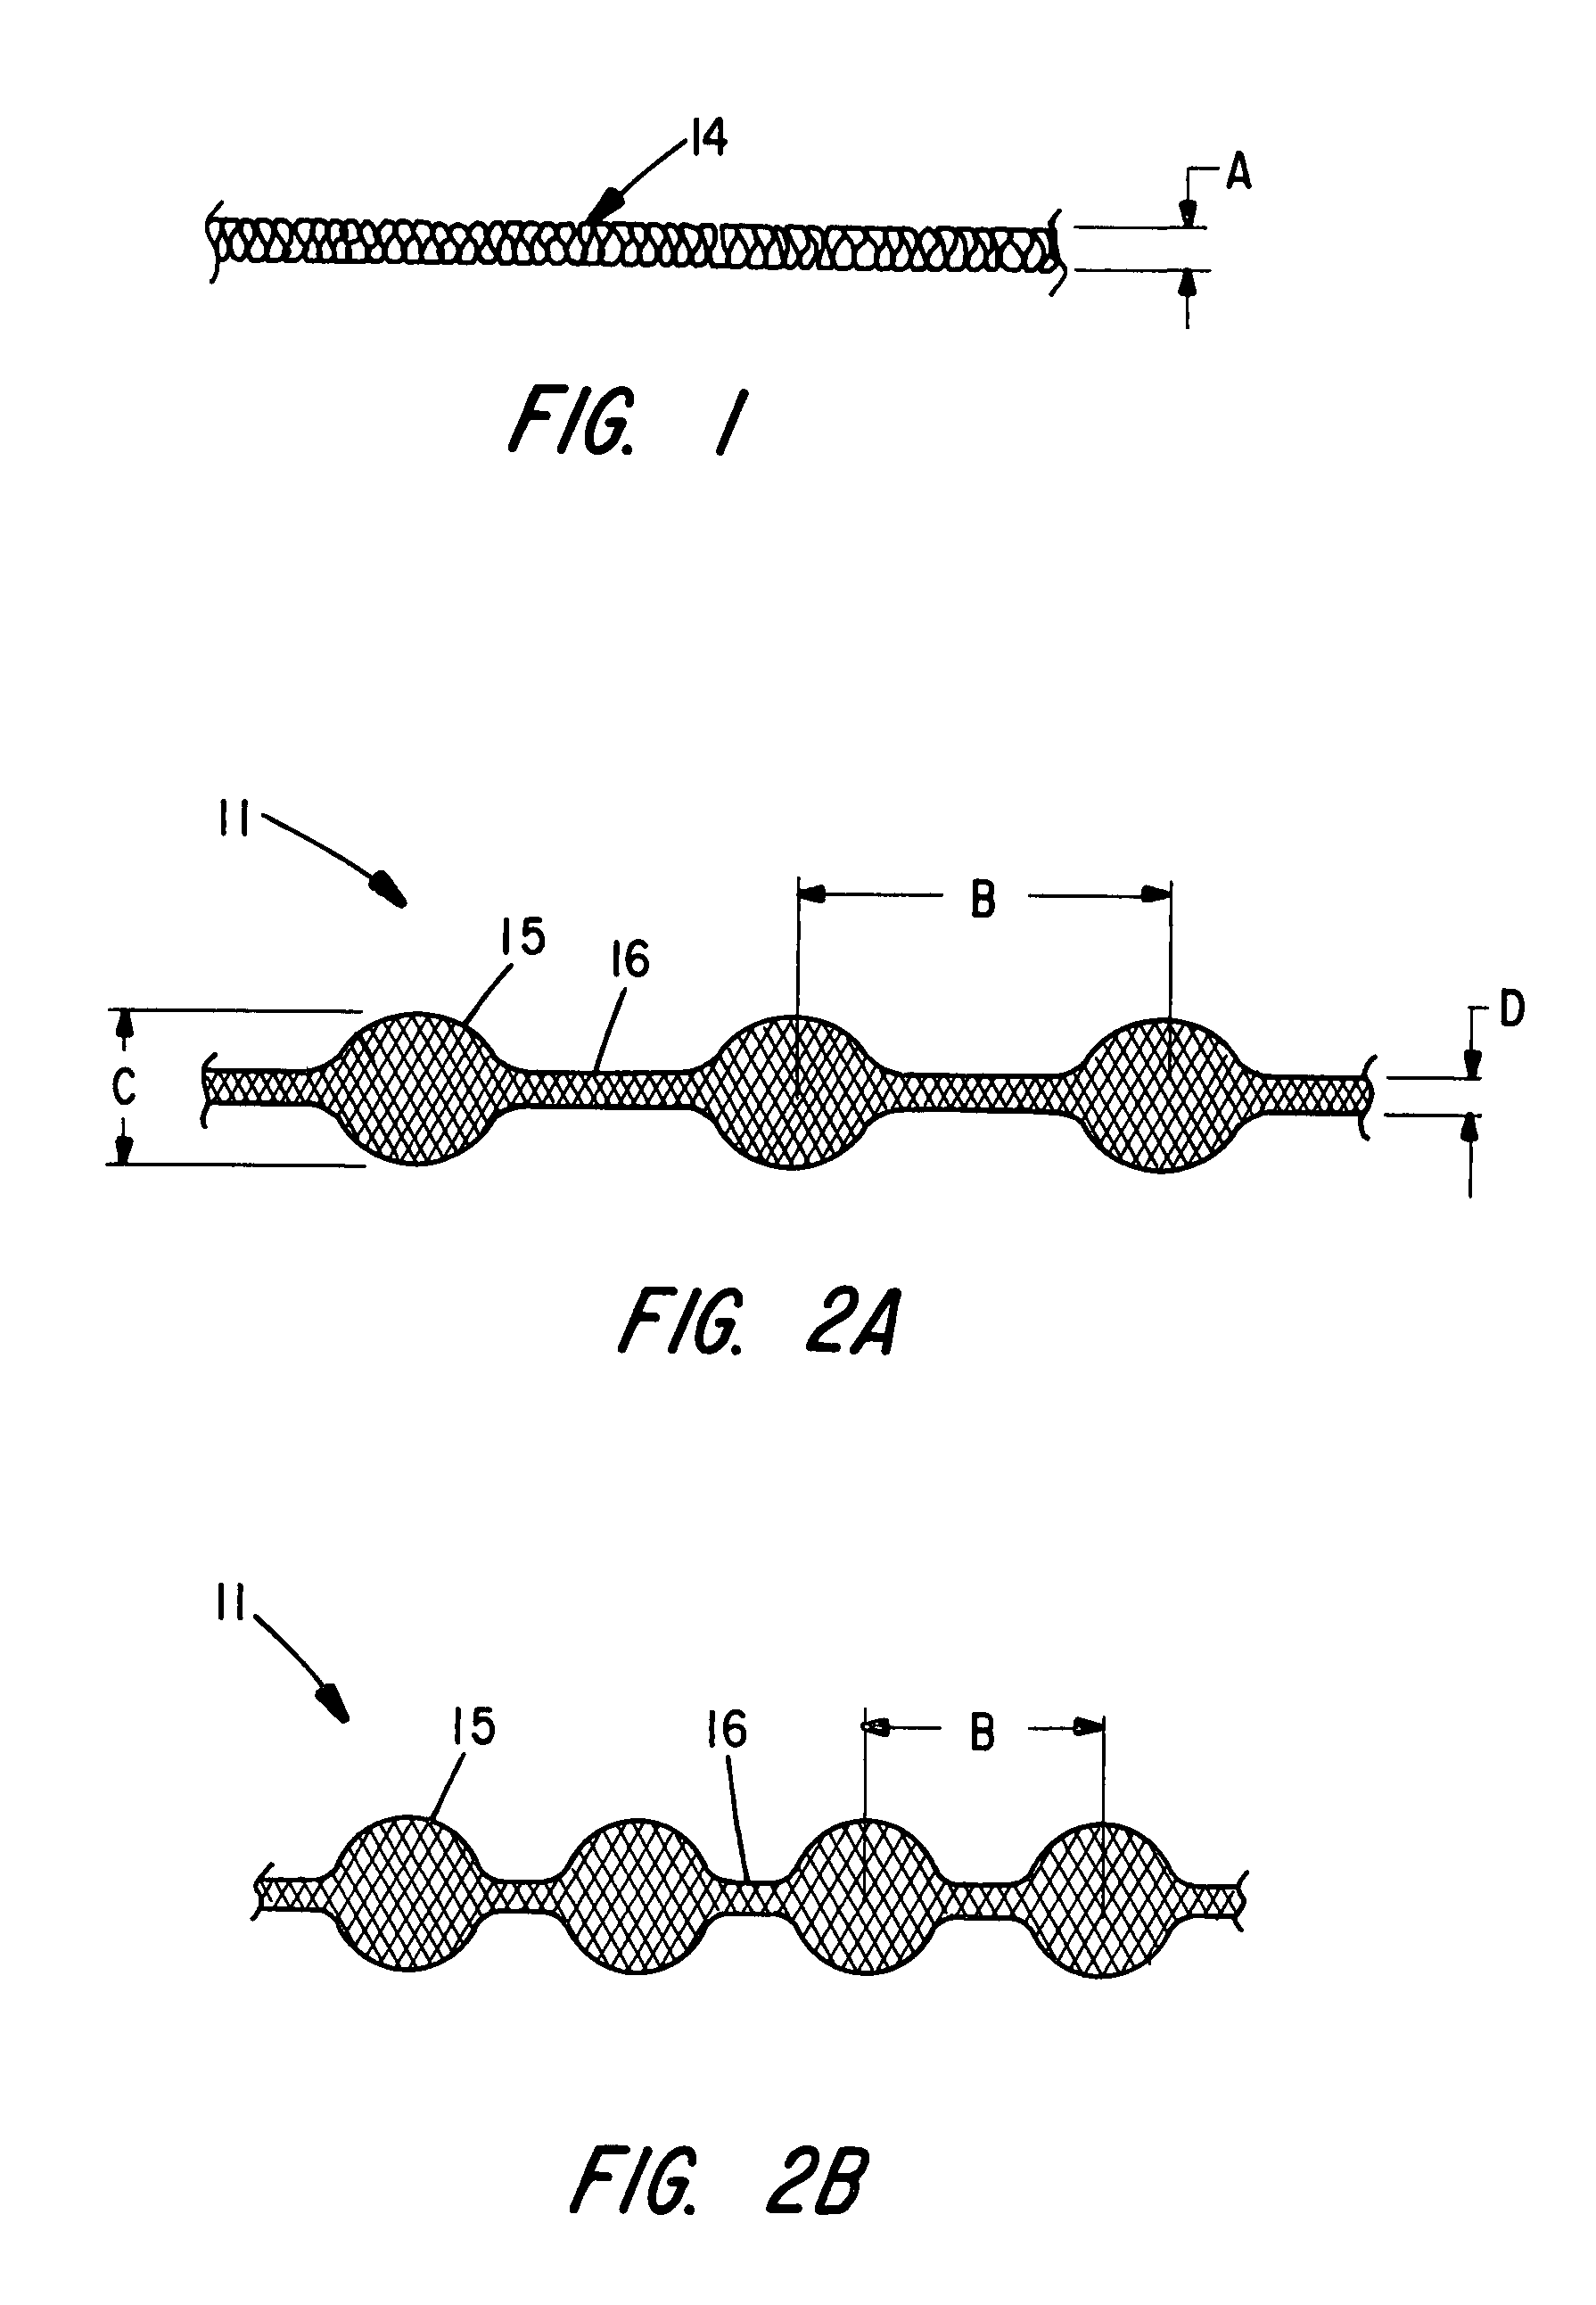 Braided occlusion device having repeating expanded volume segments separated by articulation segments